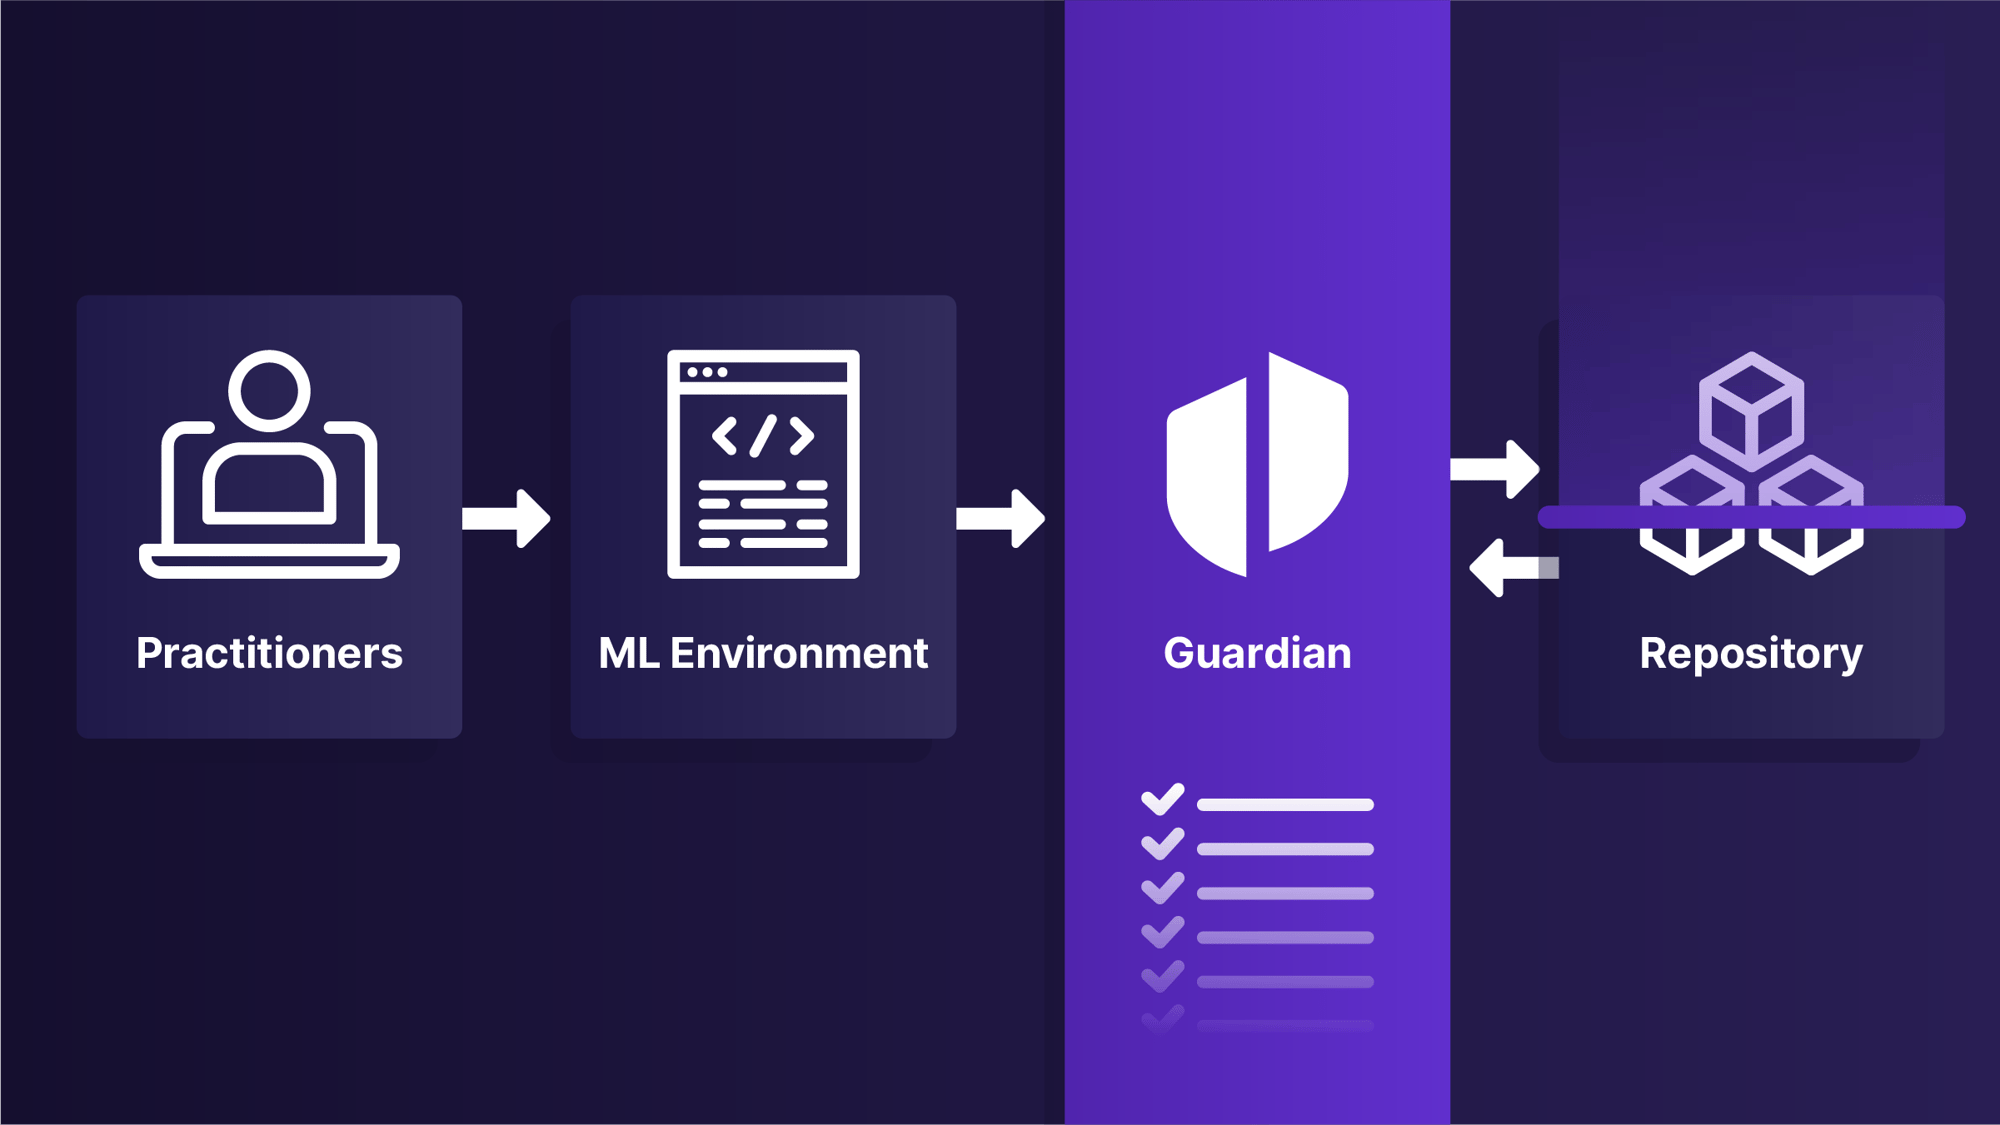 Guardian-Key features-Policy engine-1